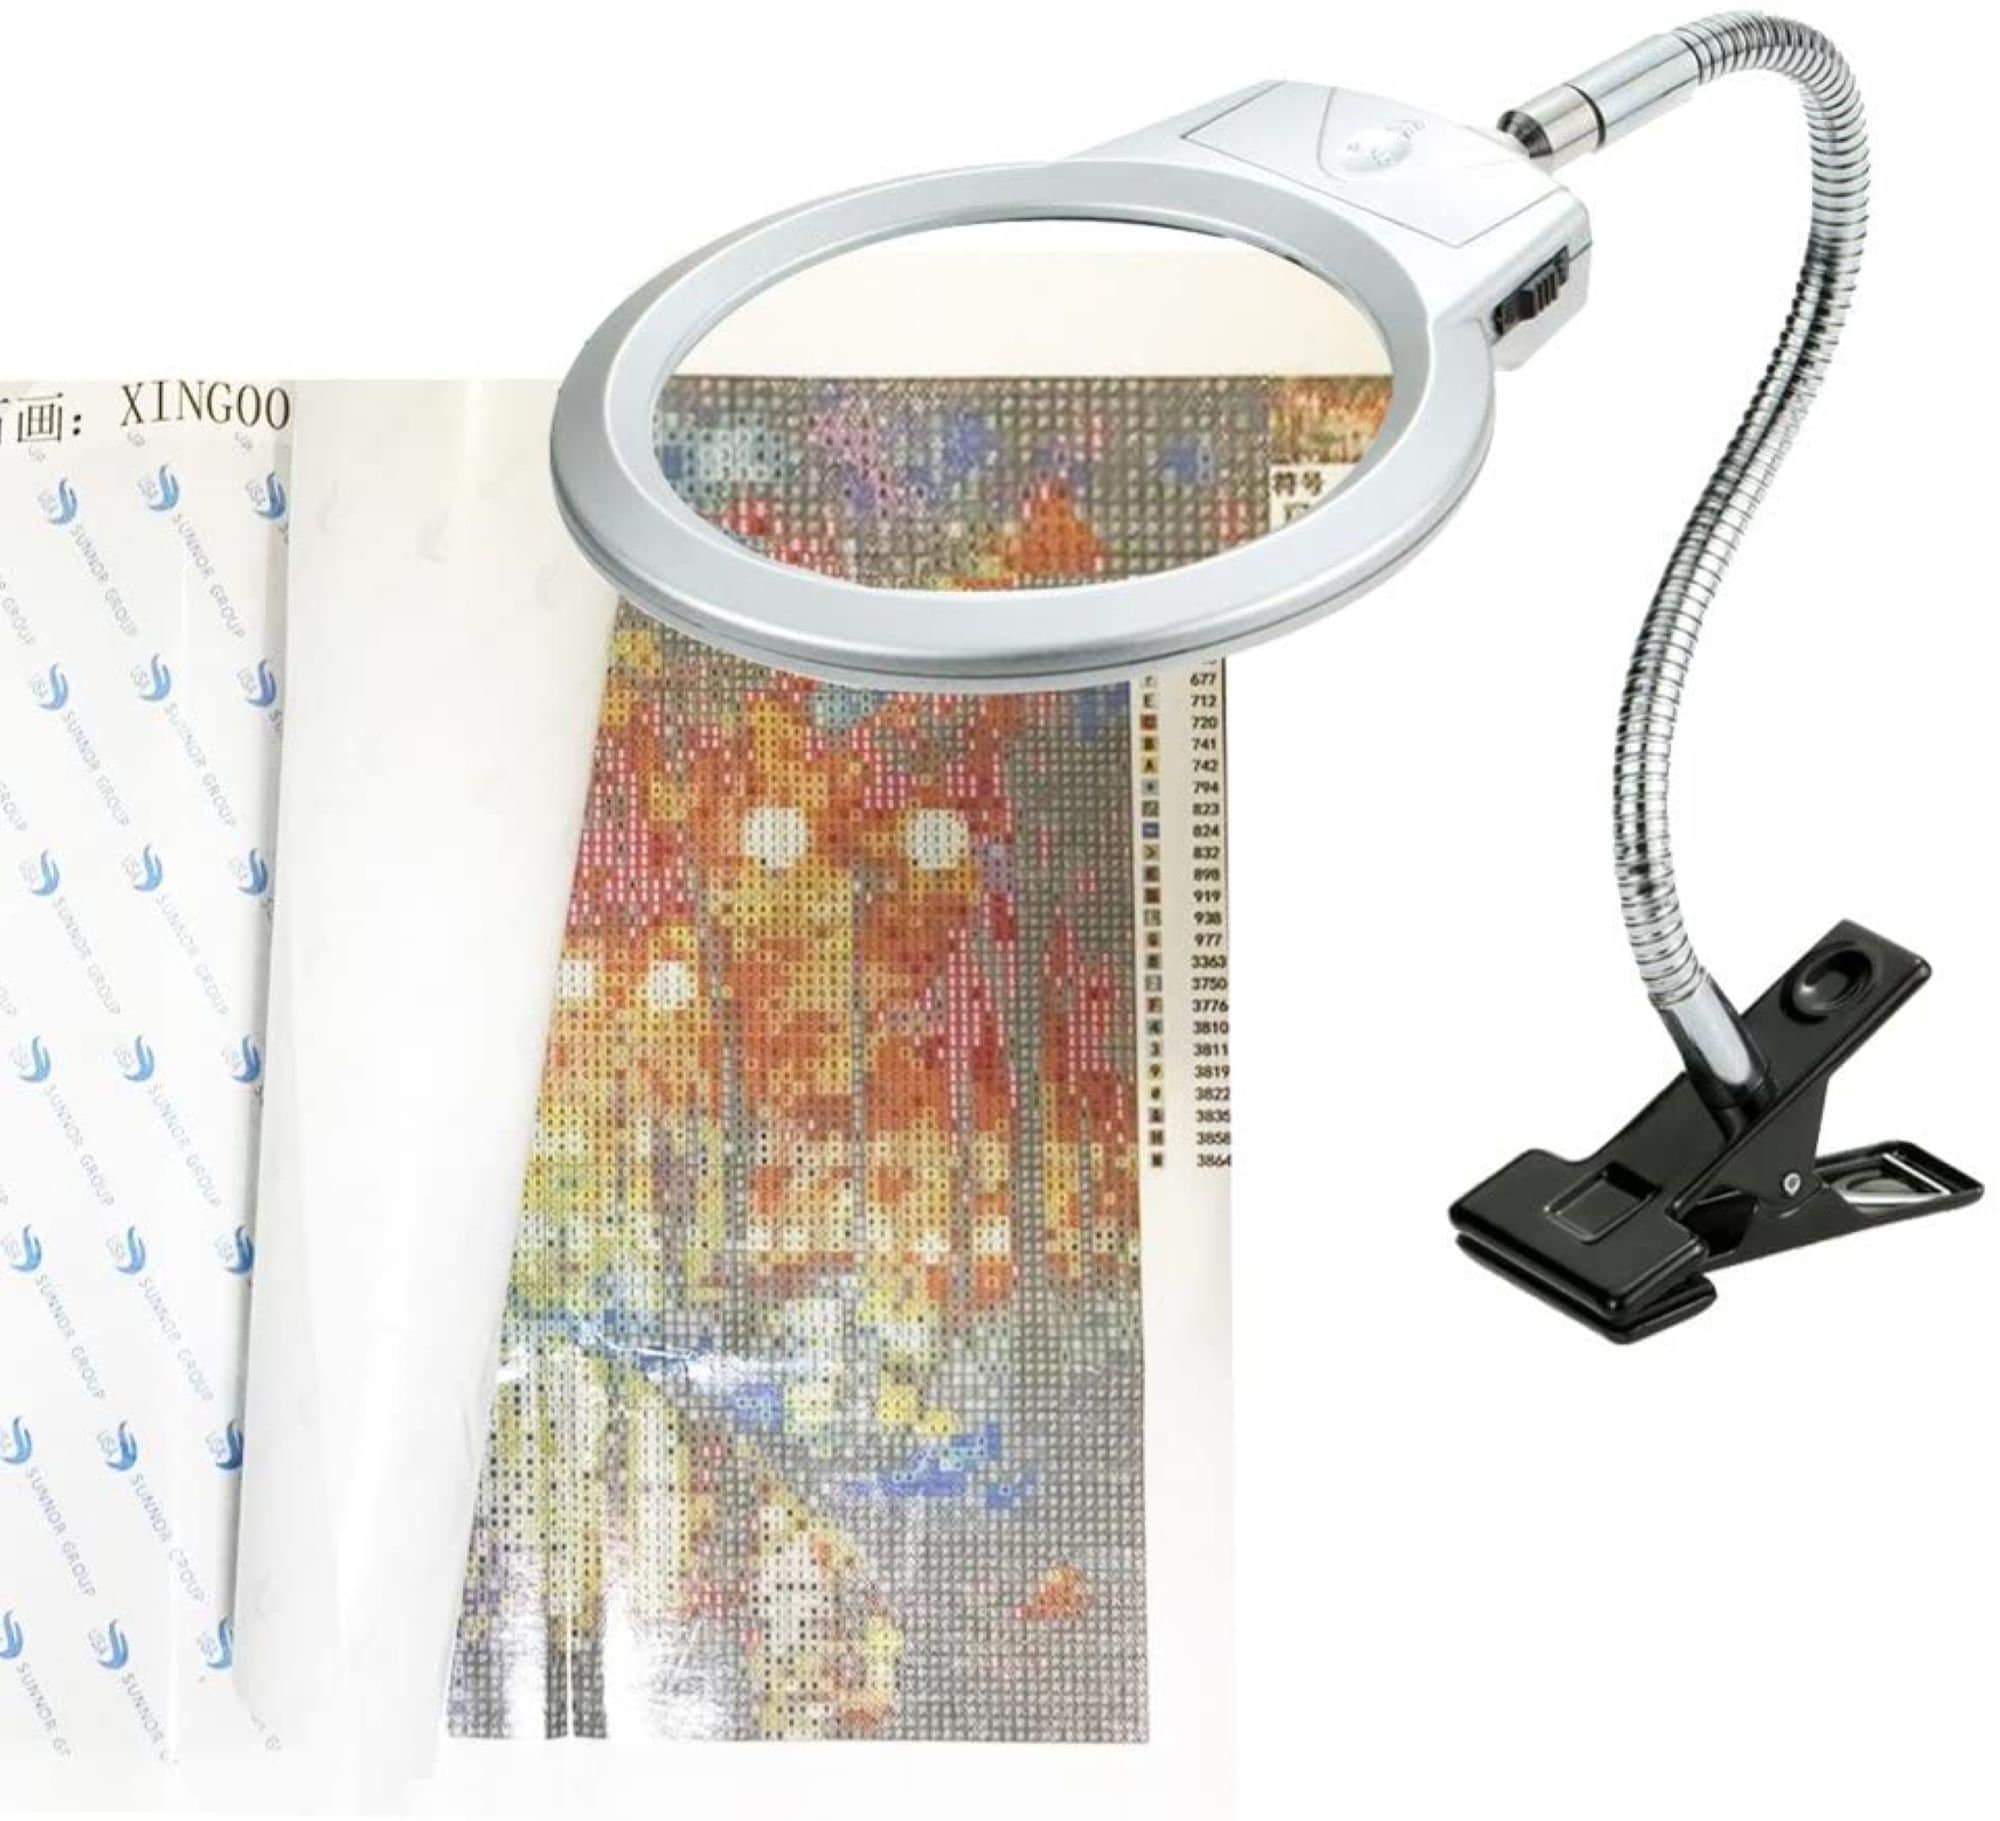 VISION AID Magnifying Glasses With Light Hands Free Magnifier for Cross  Stitch, Diamond Painting, Jewelry, Embroidery, Sewing, Crafts 